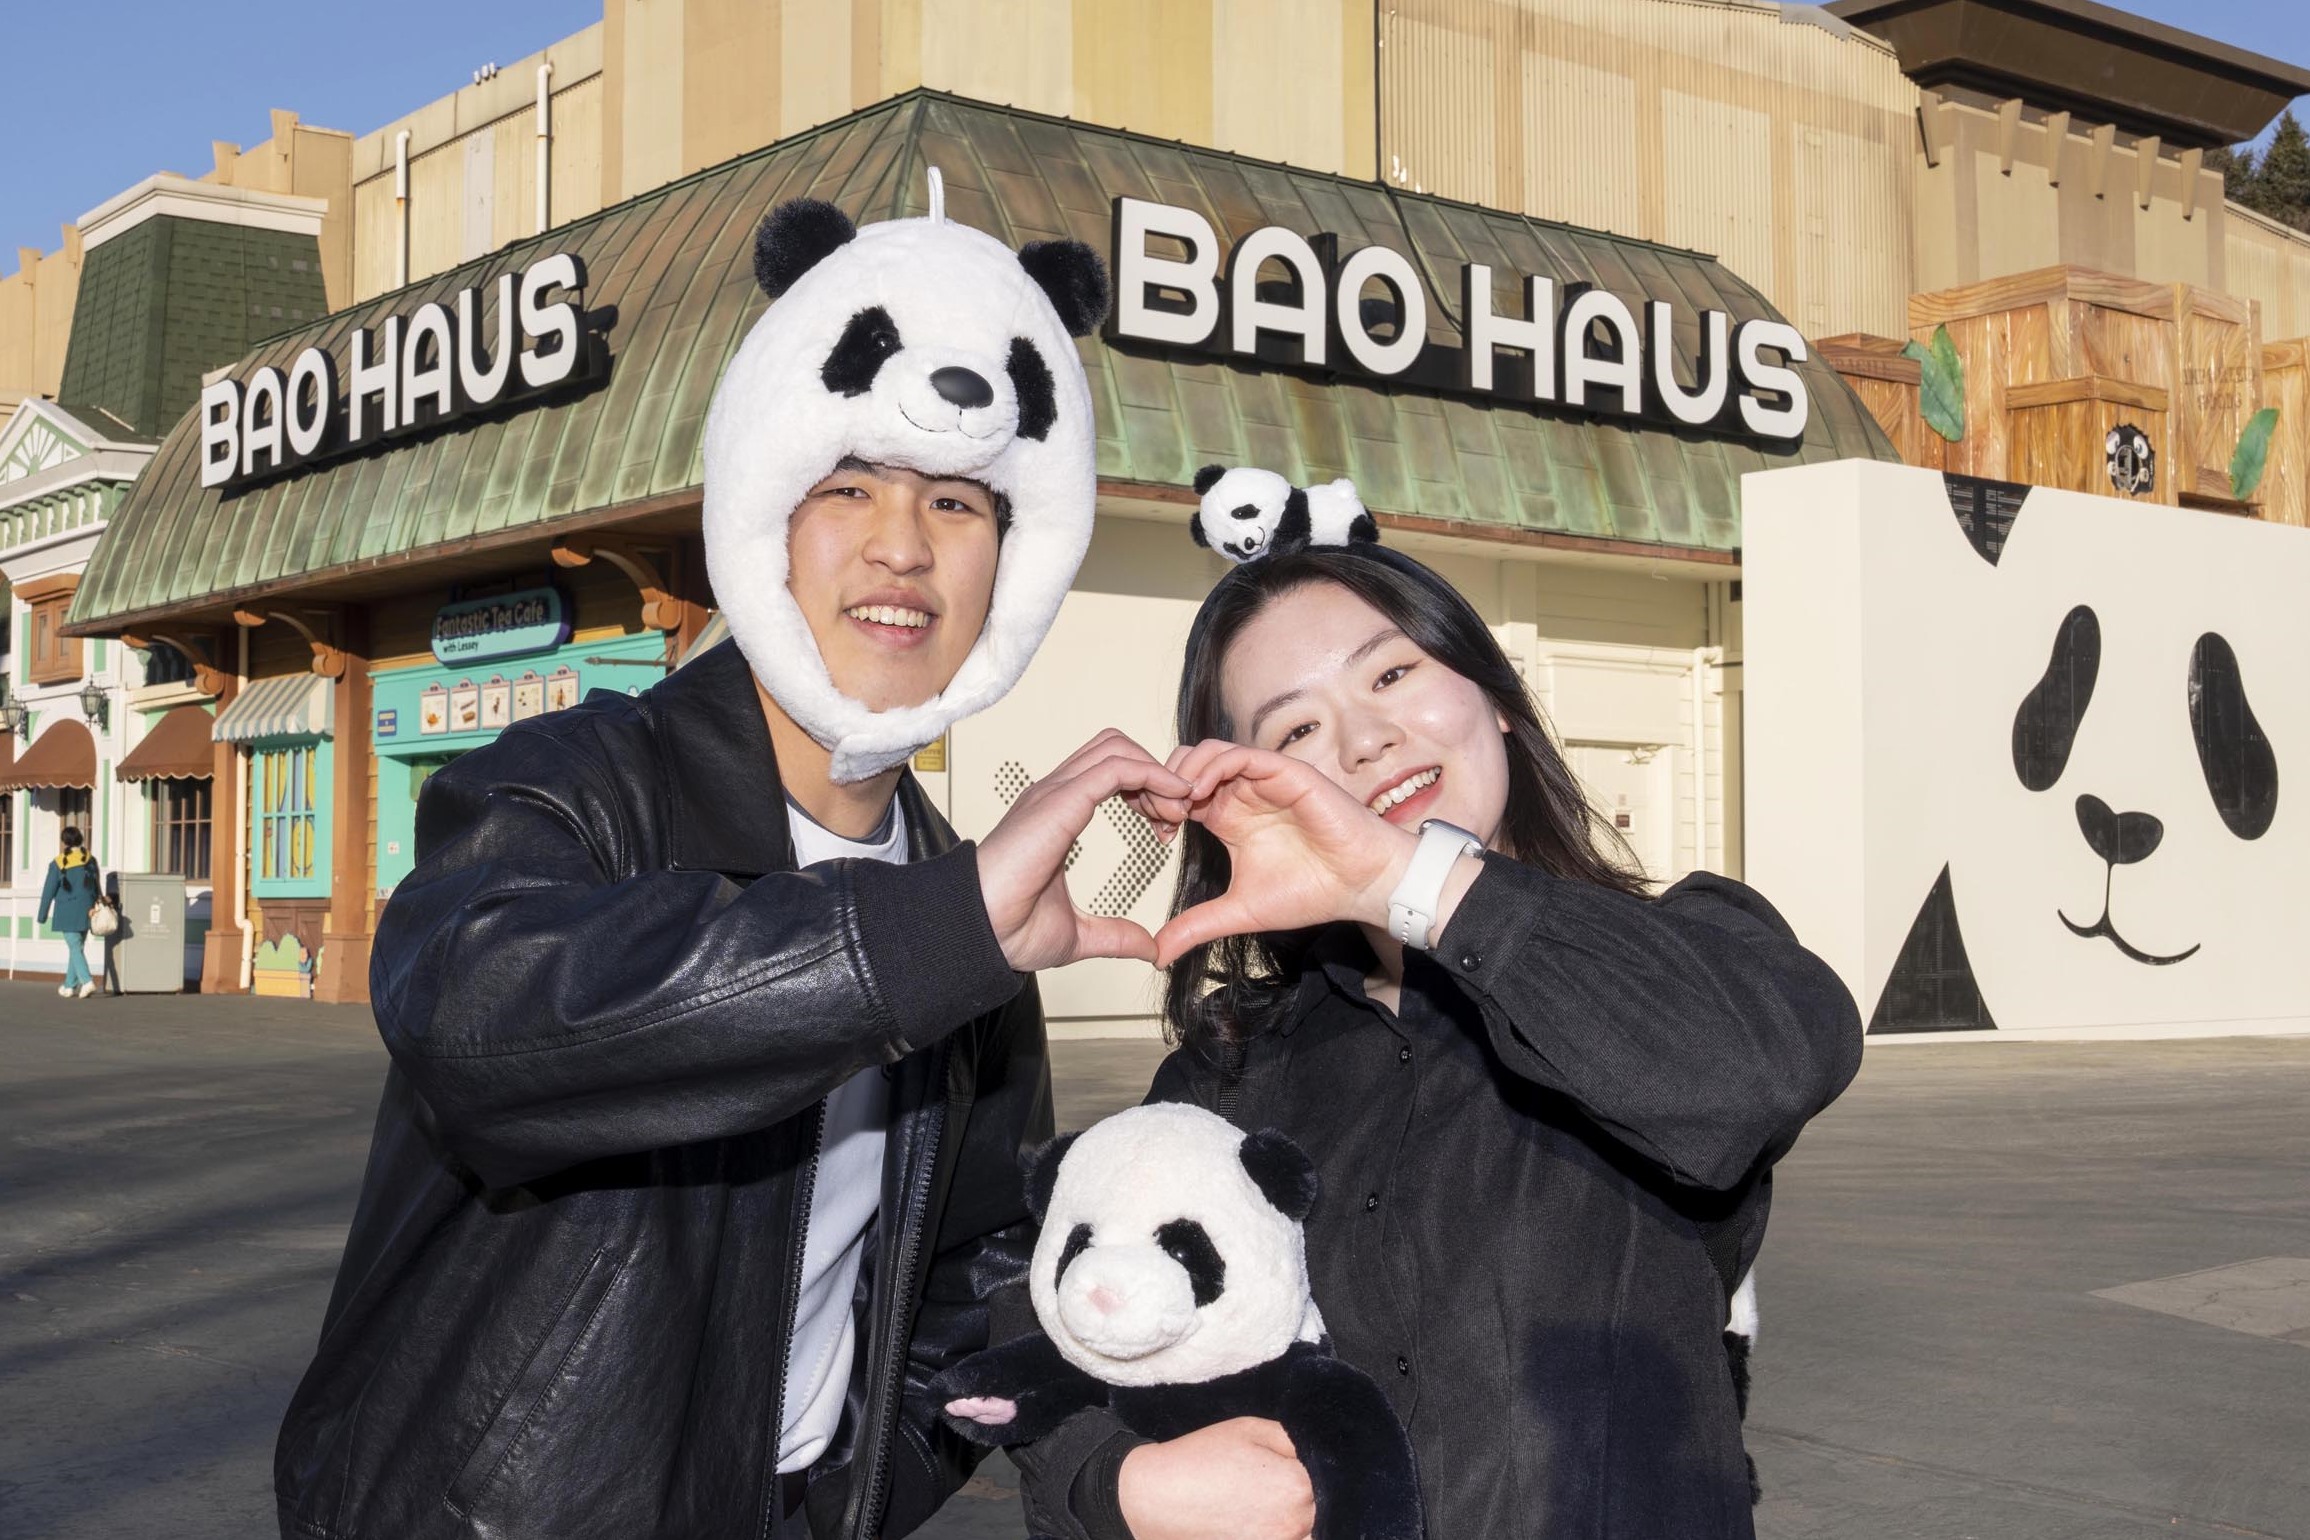 Bao Haus welcomes panda lovers from all over!